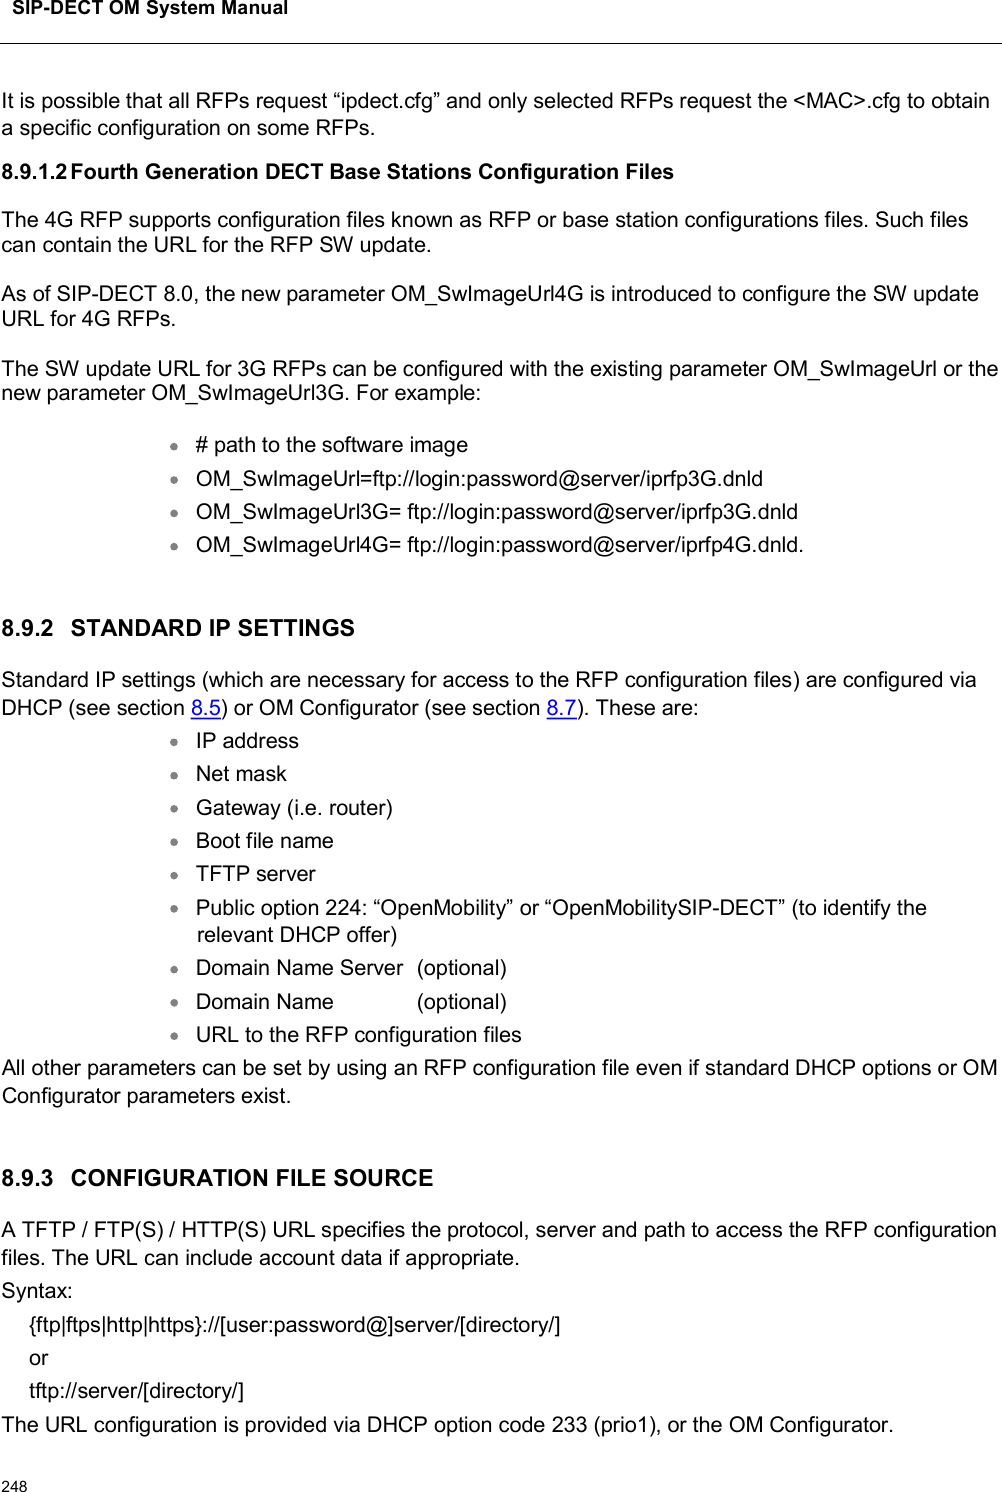 SIP-DECT OM System Manual248It is possible that all RFPs request “ipdect.cfg” and only selected RFPs request the &lt;MAC&gt;.cfg to obtain a specific configuration on some RFPs.8.9.1.2Fourth Generation DECT Base Stations Configuration FilesThe 4G RFP supports configuration files known as RFP or base station configurations files. Such files can contain the URL for the RFP SW update. As of SIP-DECT 8.0, the new parameter OM_SwImageUrl4G is introduced to configure the SW update URL for 4G RFPs. The SW update URL for 3G RFPs can be configured with the existing parameter OM_SwImageUrl or the new parameter OM_SwImageUrl3G. For example: # path to the software image OM_SwImageUrl=ftp://login:password@server/iprfp3G.dnld OM_SwImageUrl3G= ftp://login:password@server/iprfp3G.dnld OM_SwImageUrl4G= ftp://login:password@server/iprfp4G.dnld.8.9.2 STANDARD IP SETTINGSStandard IP settings (which are necessary for access to the RFP configuration files) are configured via DHCP (see section 8.5) or OM Configurator (see section 8.7). These are:IP addressNet maskGateway (i.e. router)Boot file nameTFTP serverPublic option 224: “OpenMobility” or “OpenMobilitySIP-DECT” (to identify the relevant DHCP offer)Domain Name Server (optional)Domain Name (optional)URL to the RFP configuration filesAll other parameters can be set by using an RFP configuration file even if standard DHCP options or OM Configurator parameters exist.8.9.3 CONFIGURATION FILE SOURCEA TFTP / FTP(S) / HTTP(S) URL specifies the protocol, server and path to access the RFP configuration files. The URL can include account data if appropriate.Syntax:{ftp|ftps|http|https}://[user:password@]server/[directory/]ortftp://server/[directory/]The URL configuration is provided via DHCP option code 233 (prio1), or the OM Configurator.